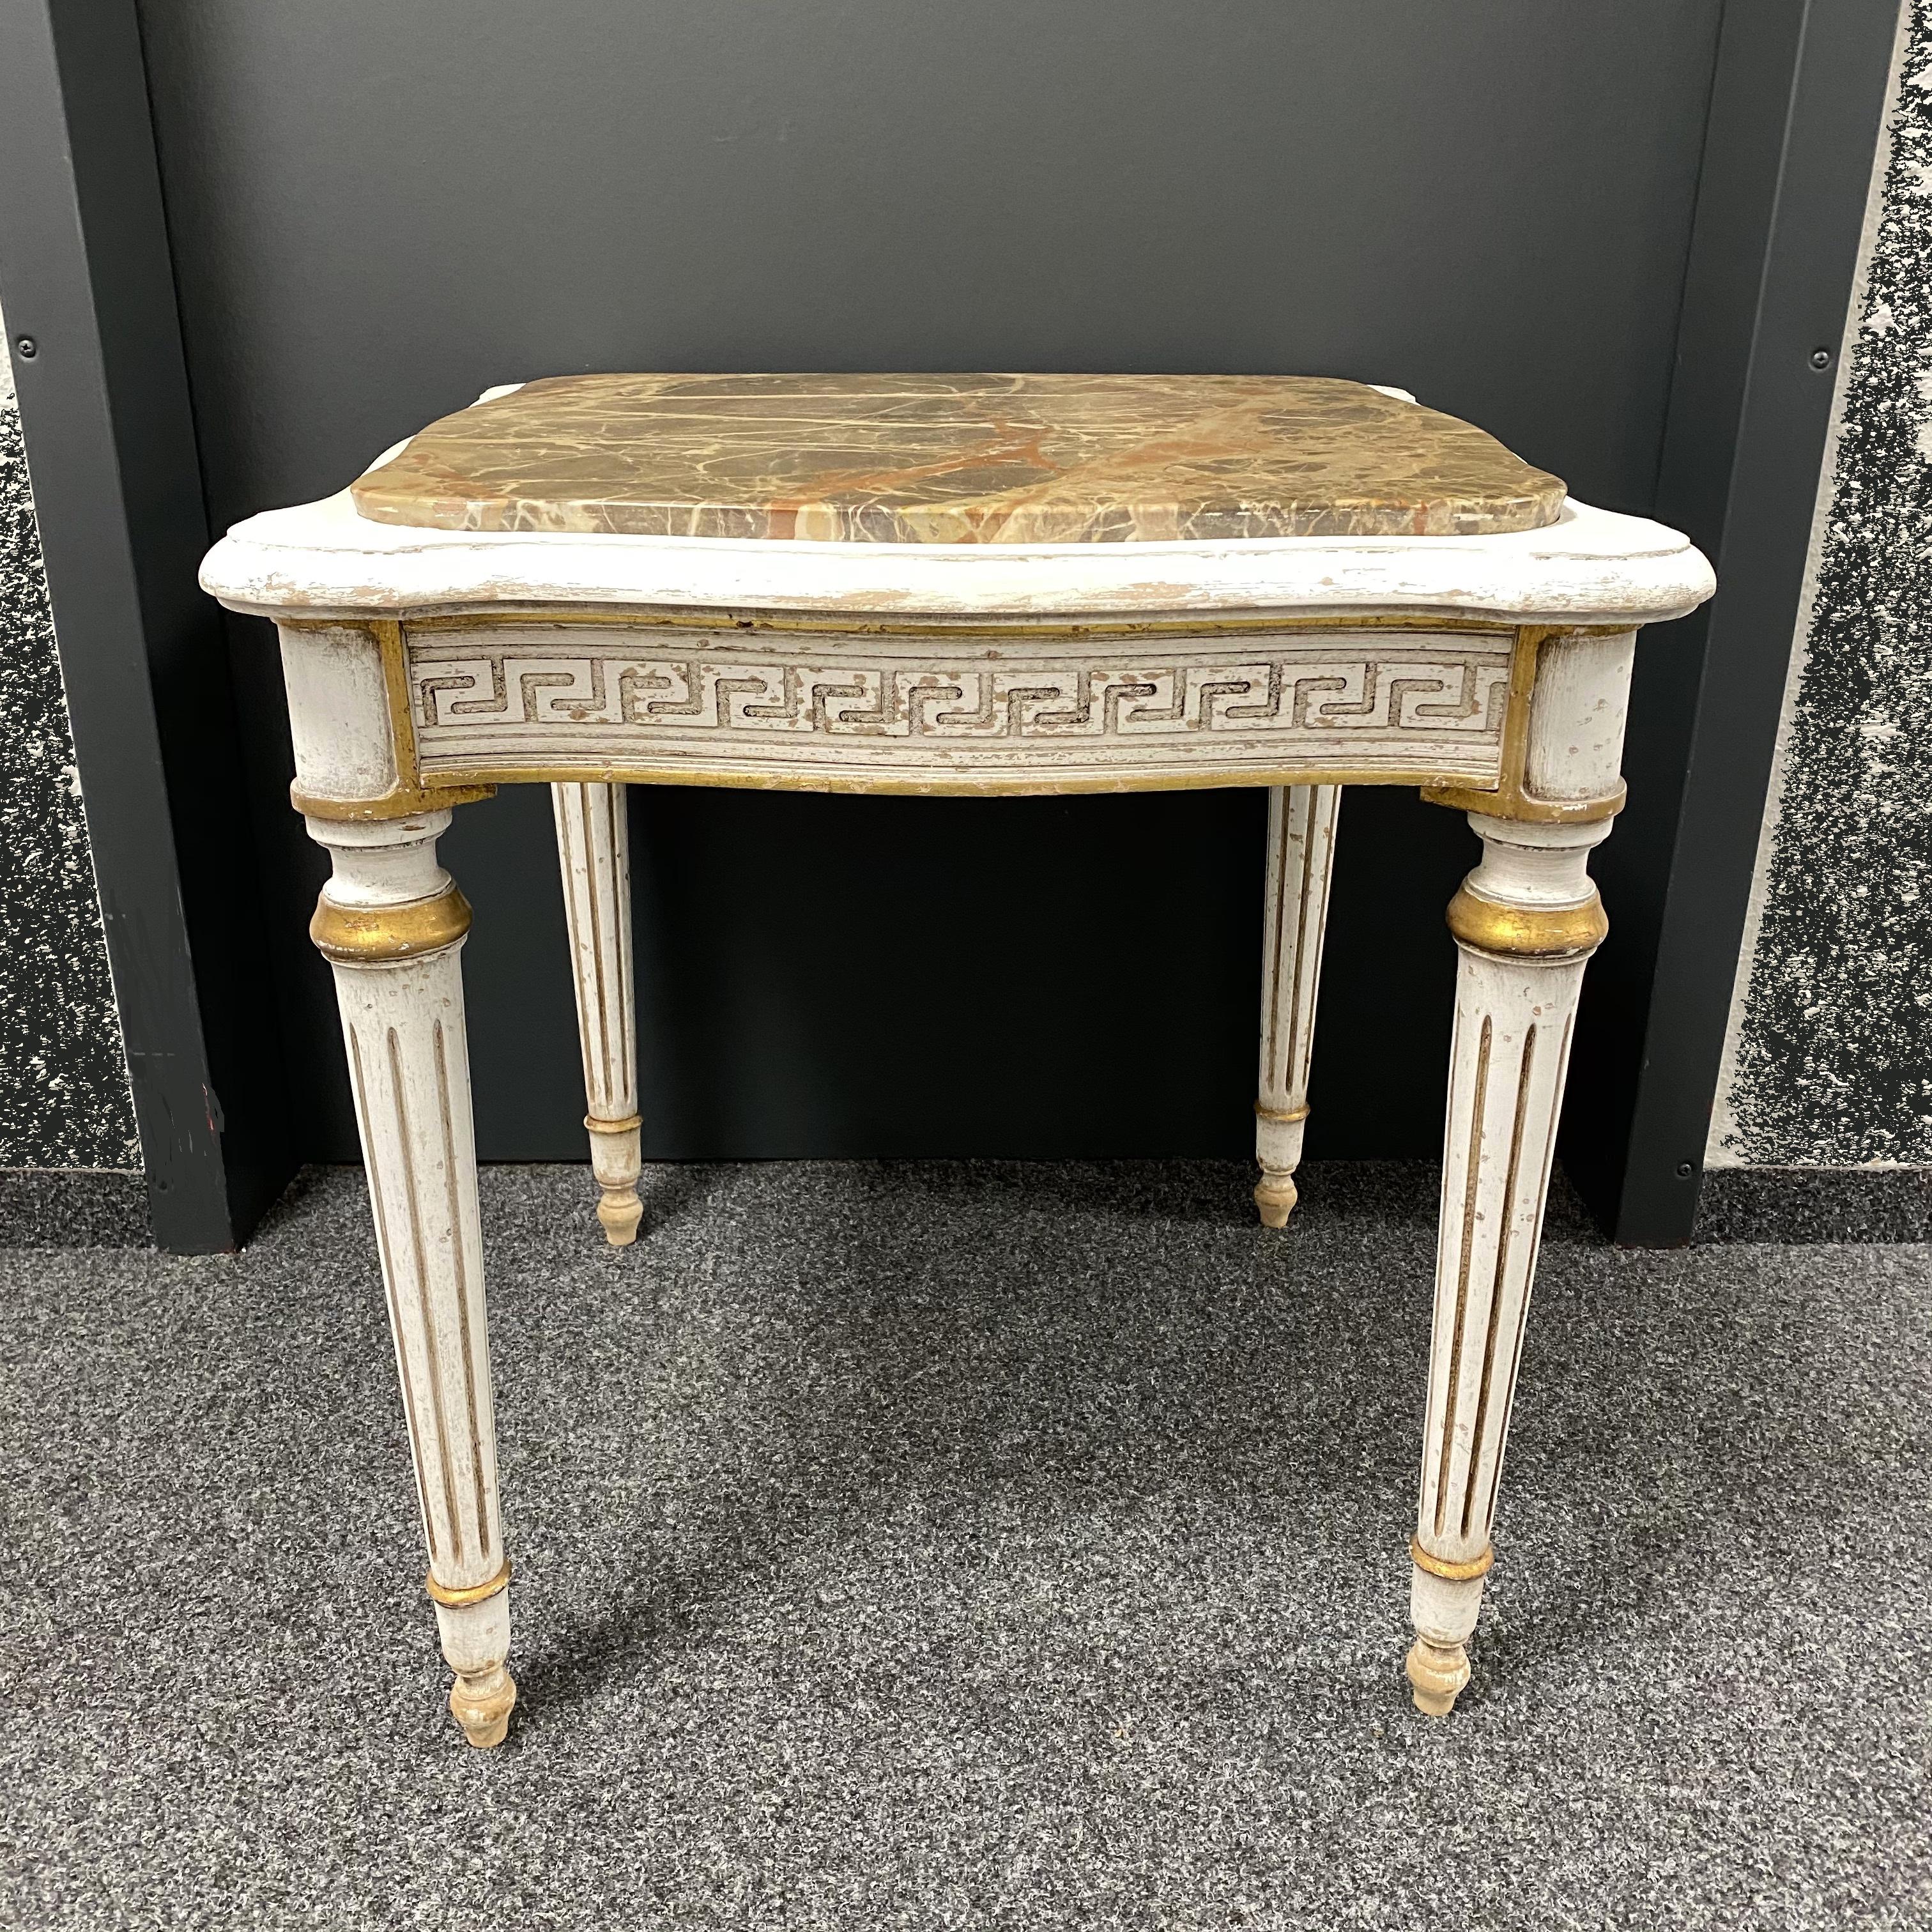 A gorgeous chippy white paint table in an Empire style. This table has beautiful guilt details throughout. Add an elegant touch to your home with this exceptional vintage highly decorative furniture. Again, the table is in original as found